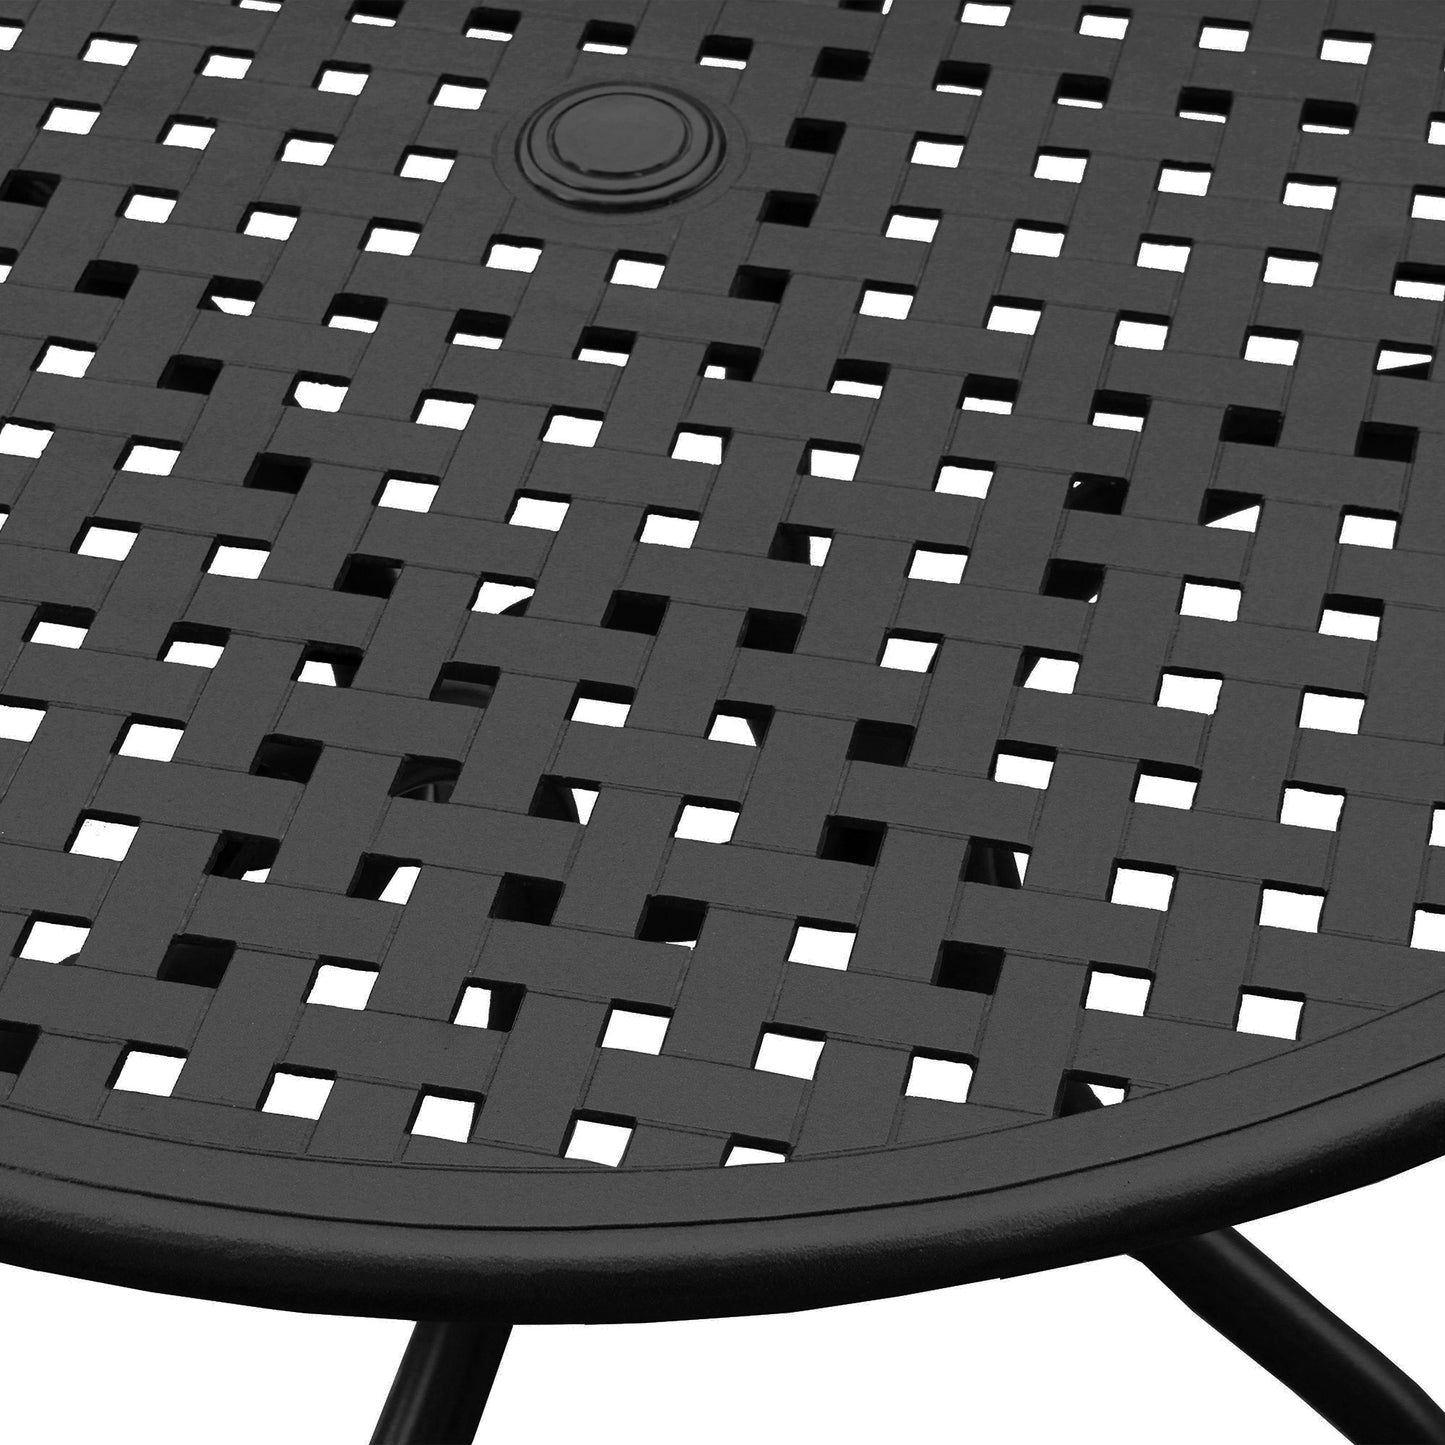 Outdoor Aluminum 5pc Round Black Patio Dining Set with Four Chairs